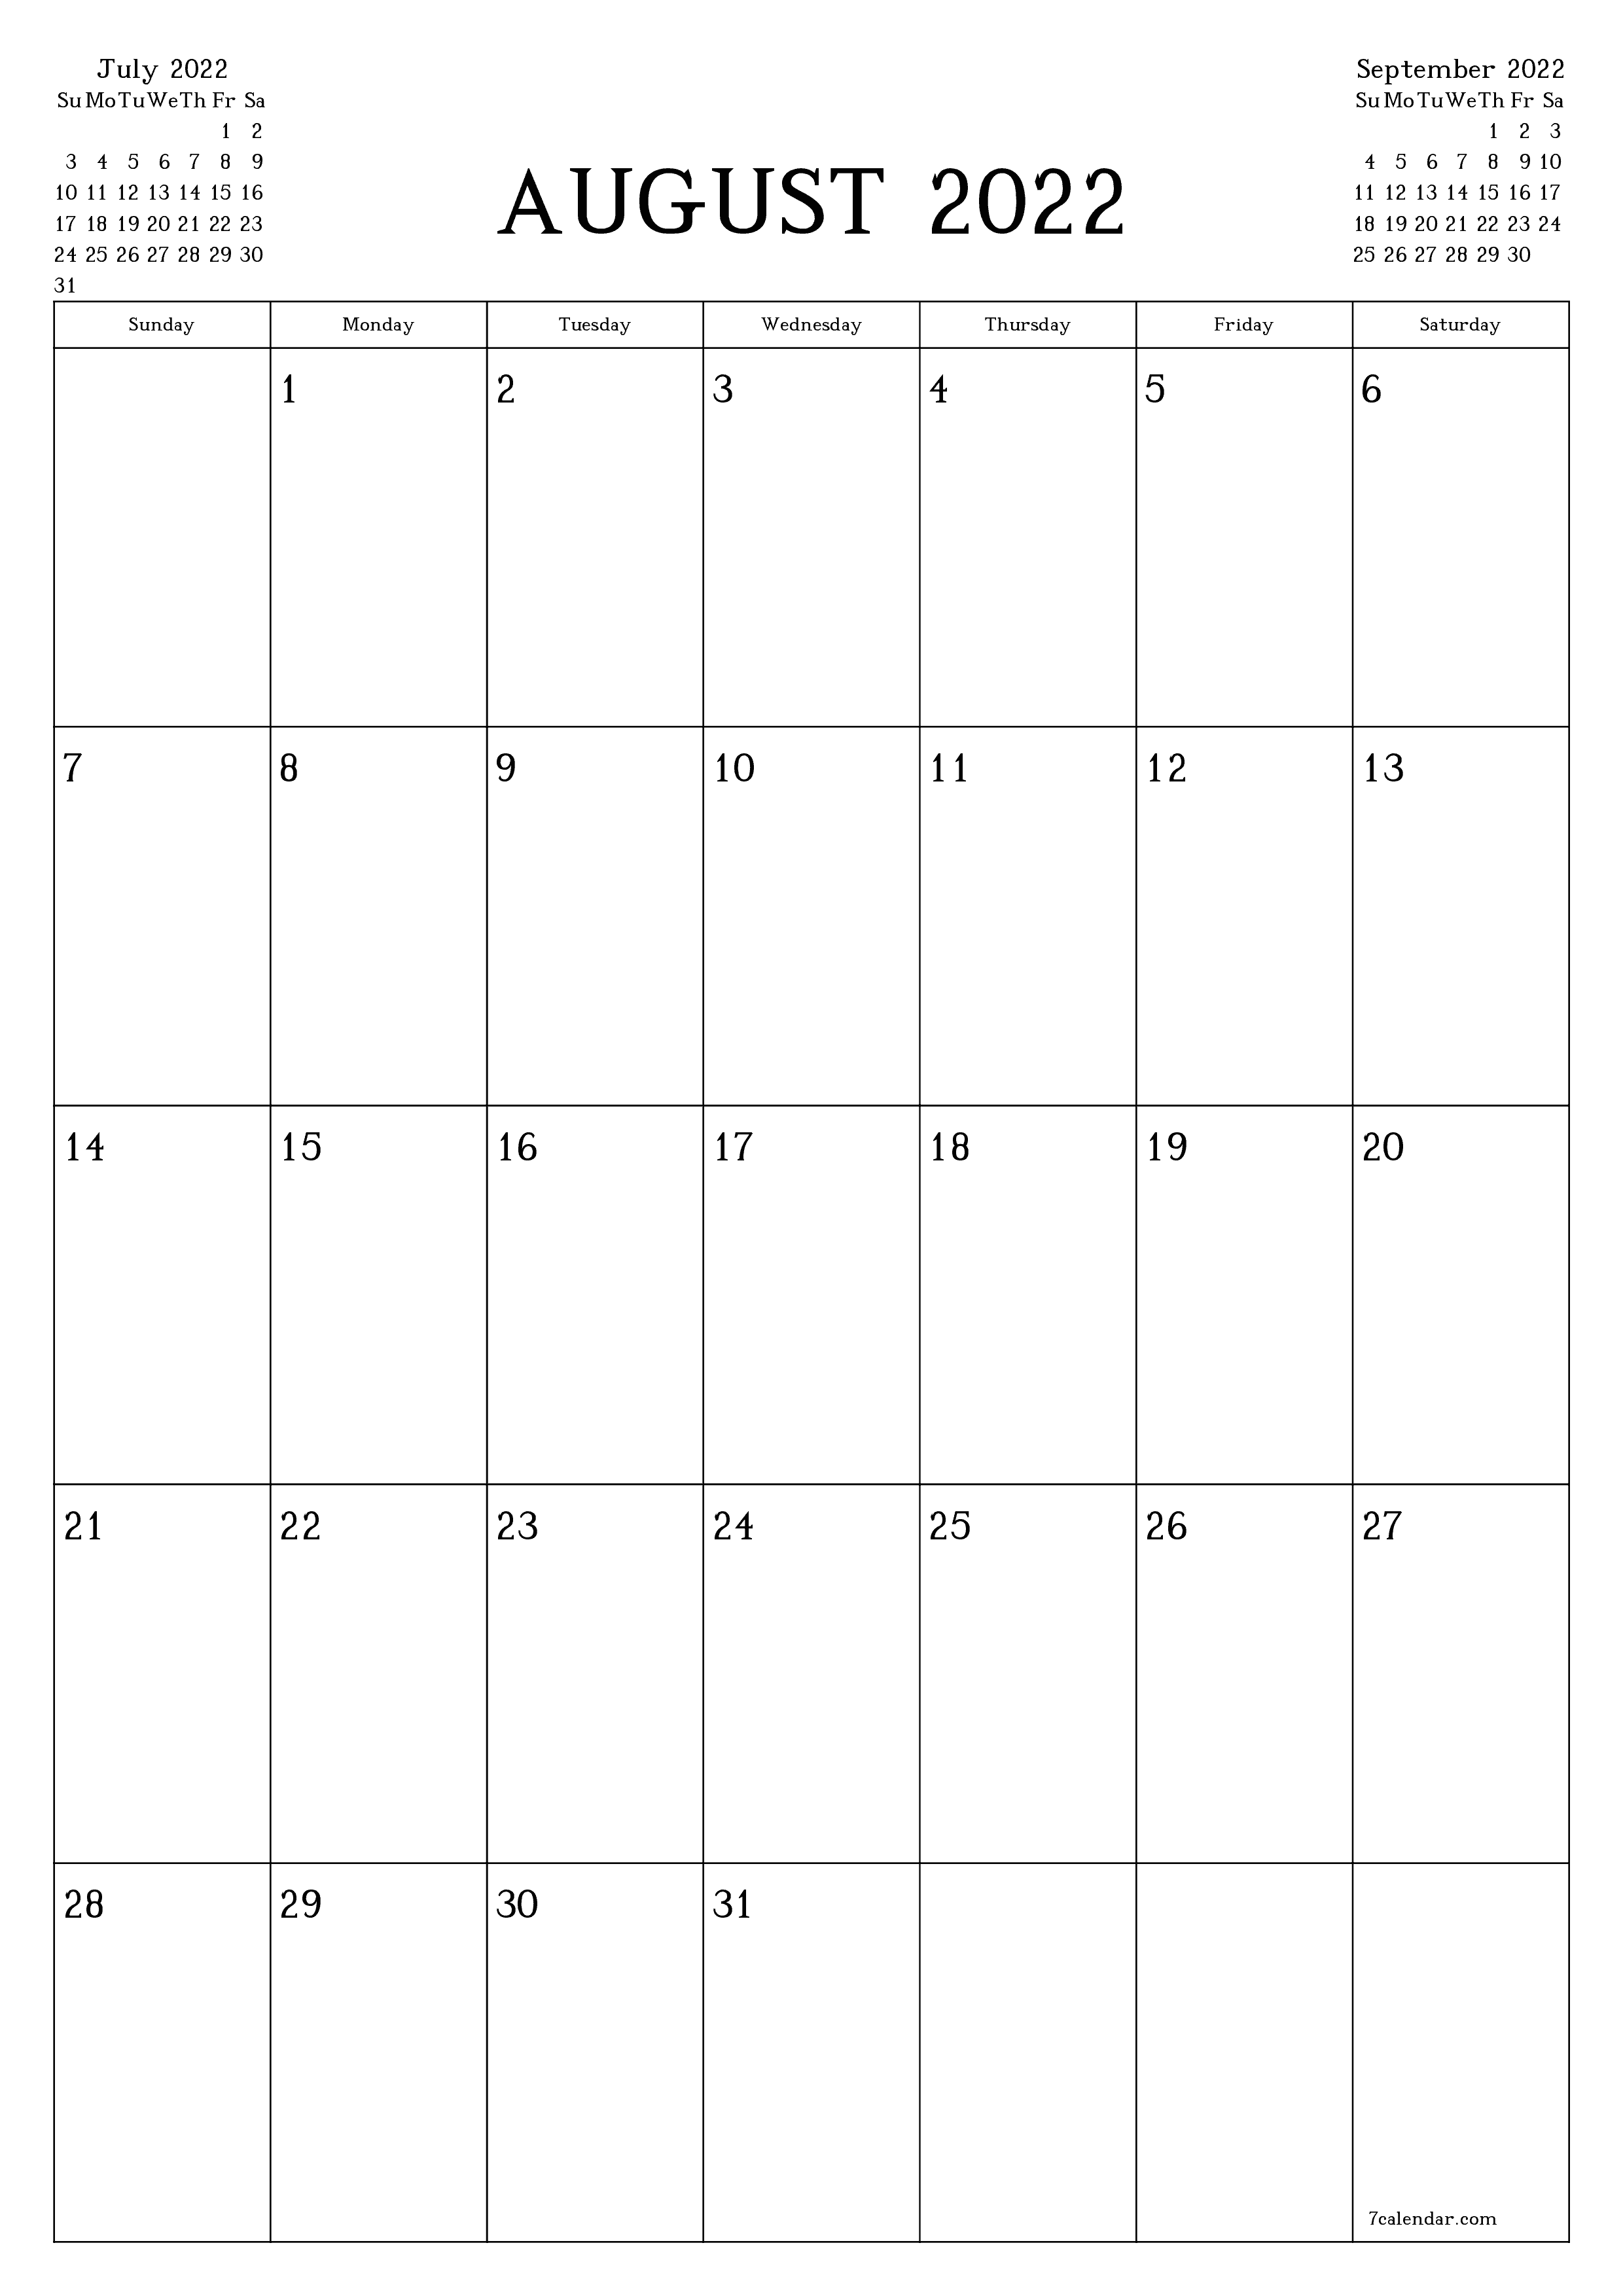 Blank monthly calendar planner for month August 2022 with notes save and print to PDF PNG English - 7calendar.com